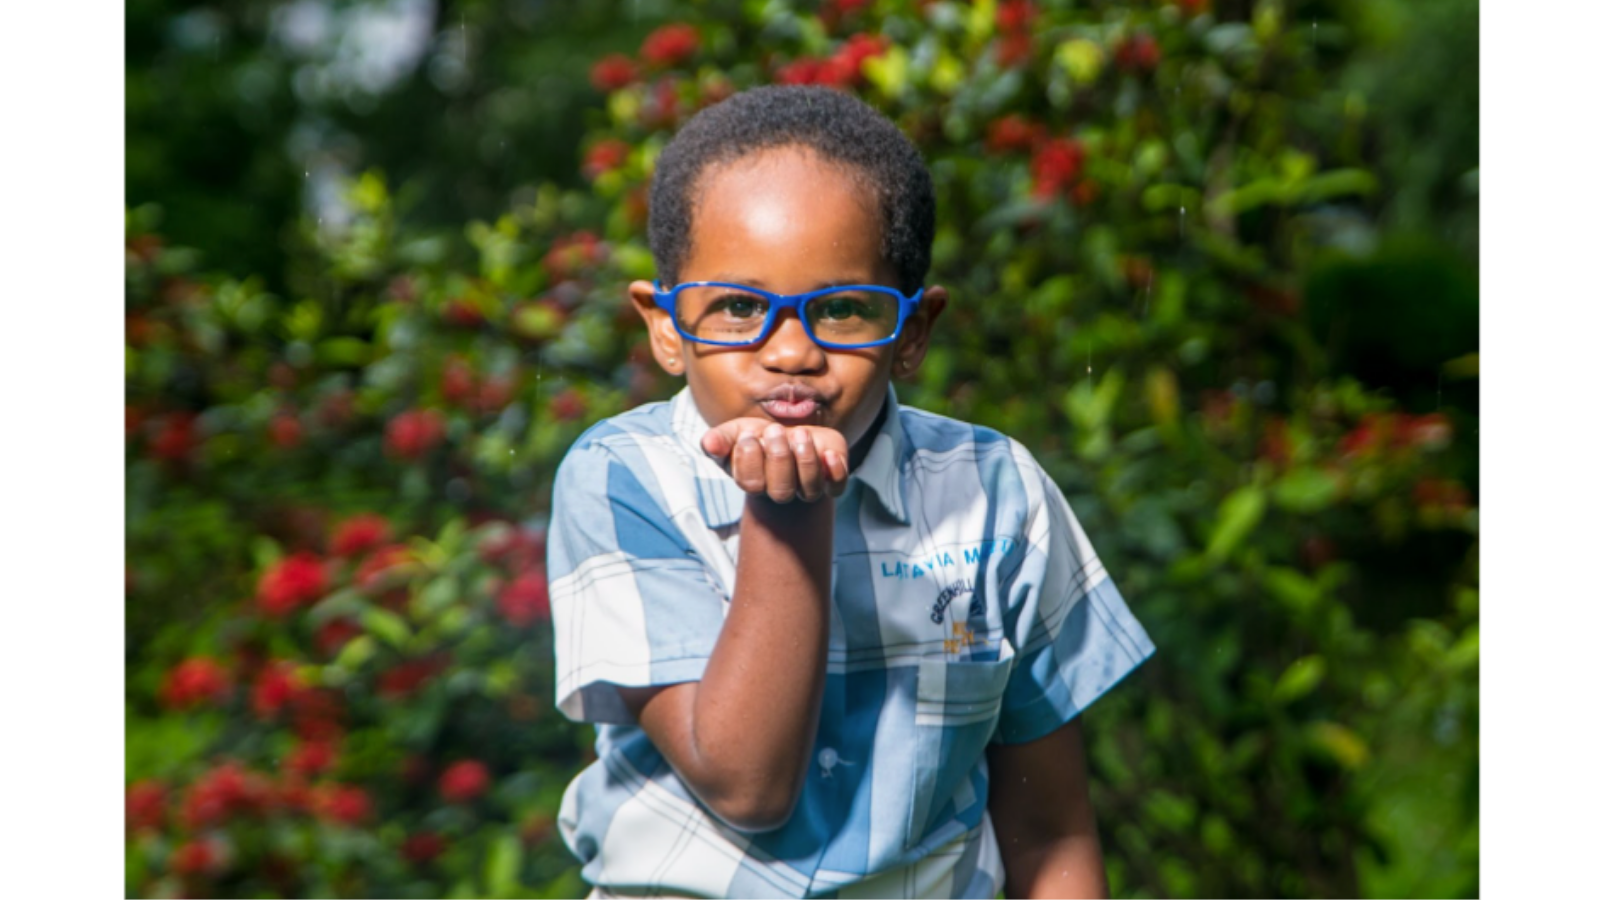 Image of young boy wearing Wazi glasses from AT impact fund programme Cover Image